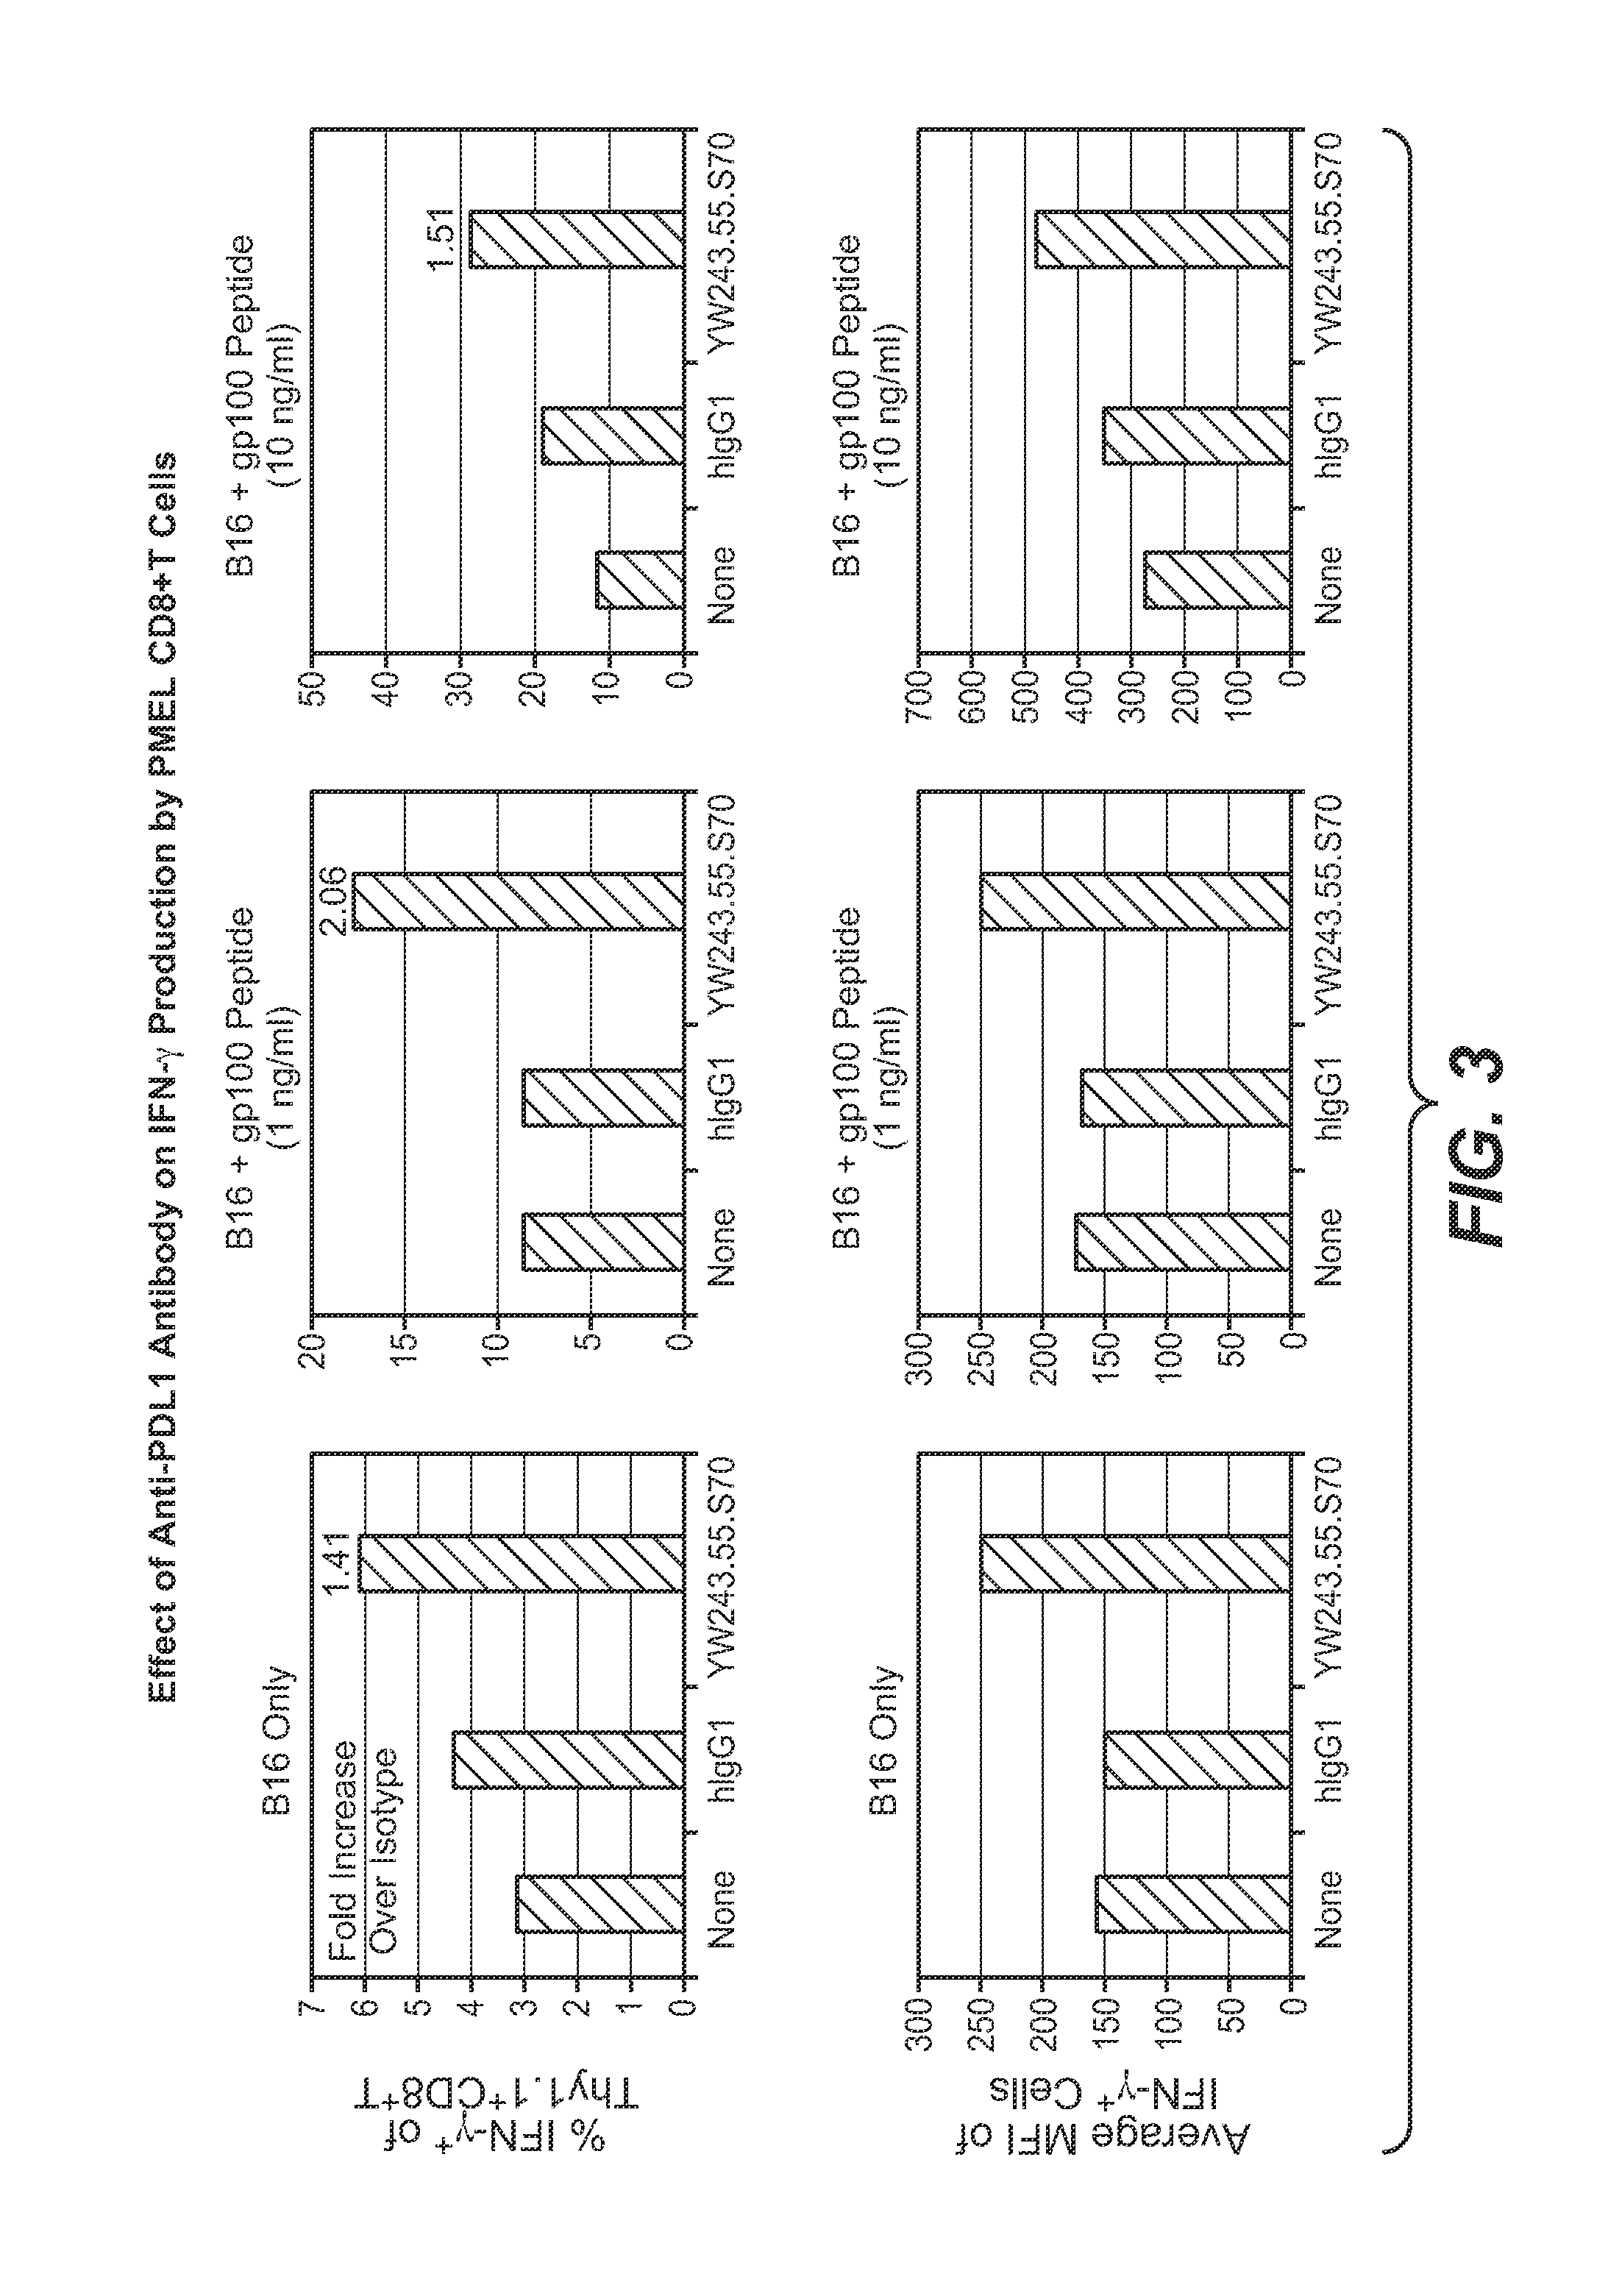 Anti-PD-L1 antibodies, compositions and articles of manufacture